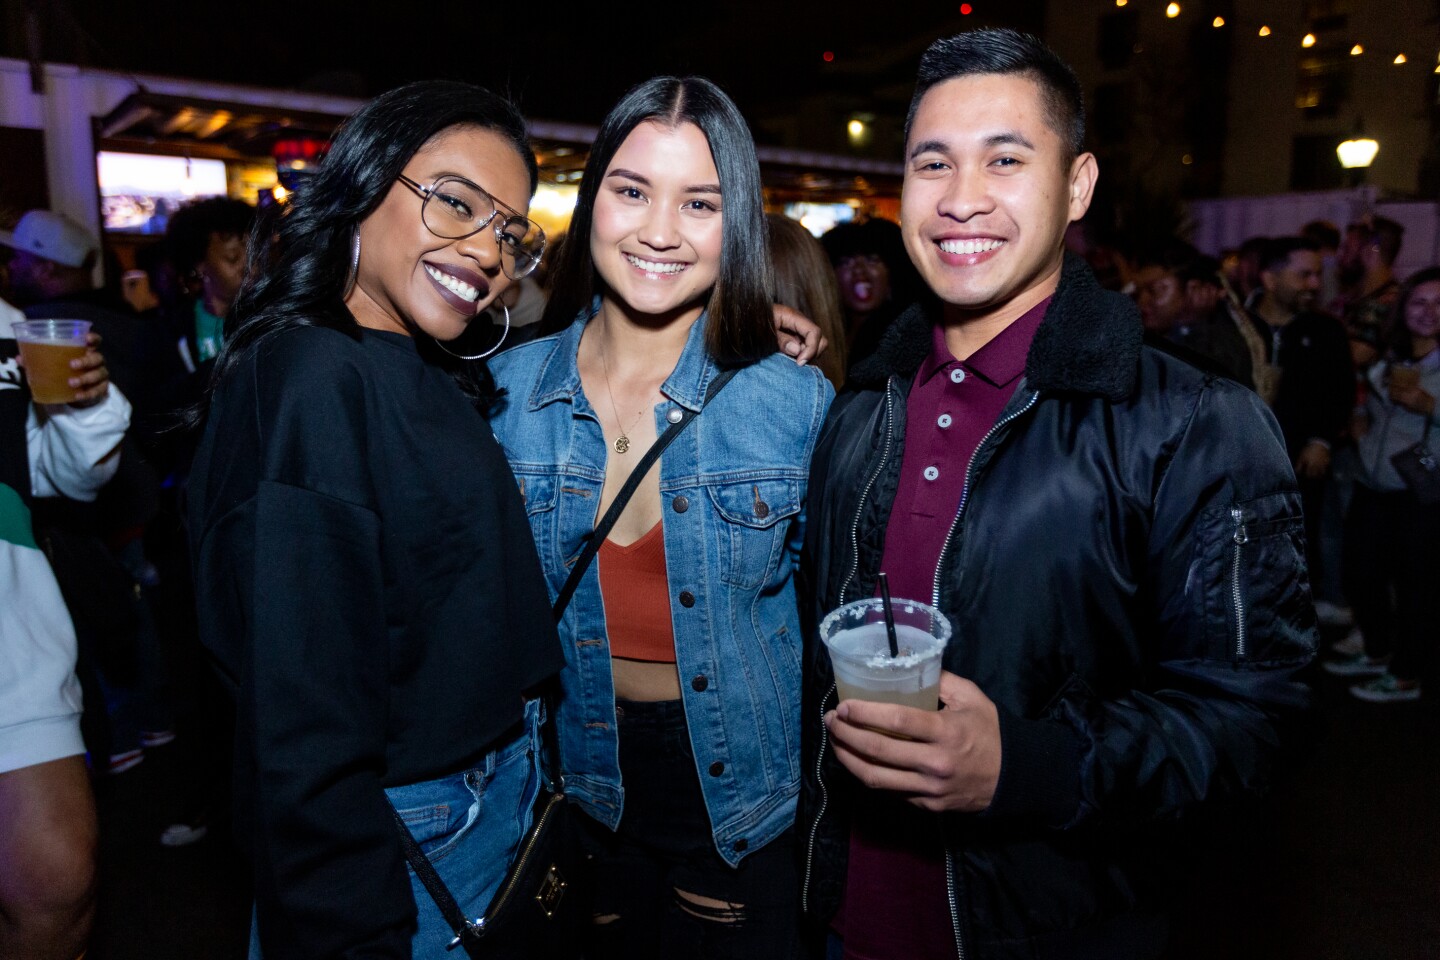 Guests grooved at the R&B Block Party at Quartyard in East Village on Saturday, Feb. 29, 2020.